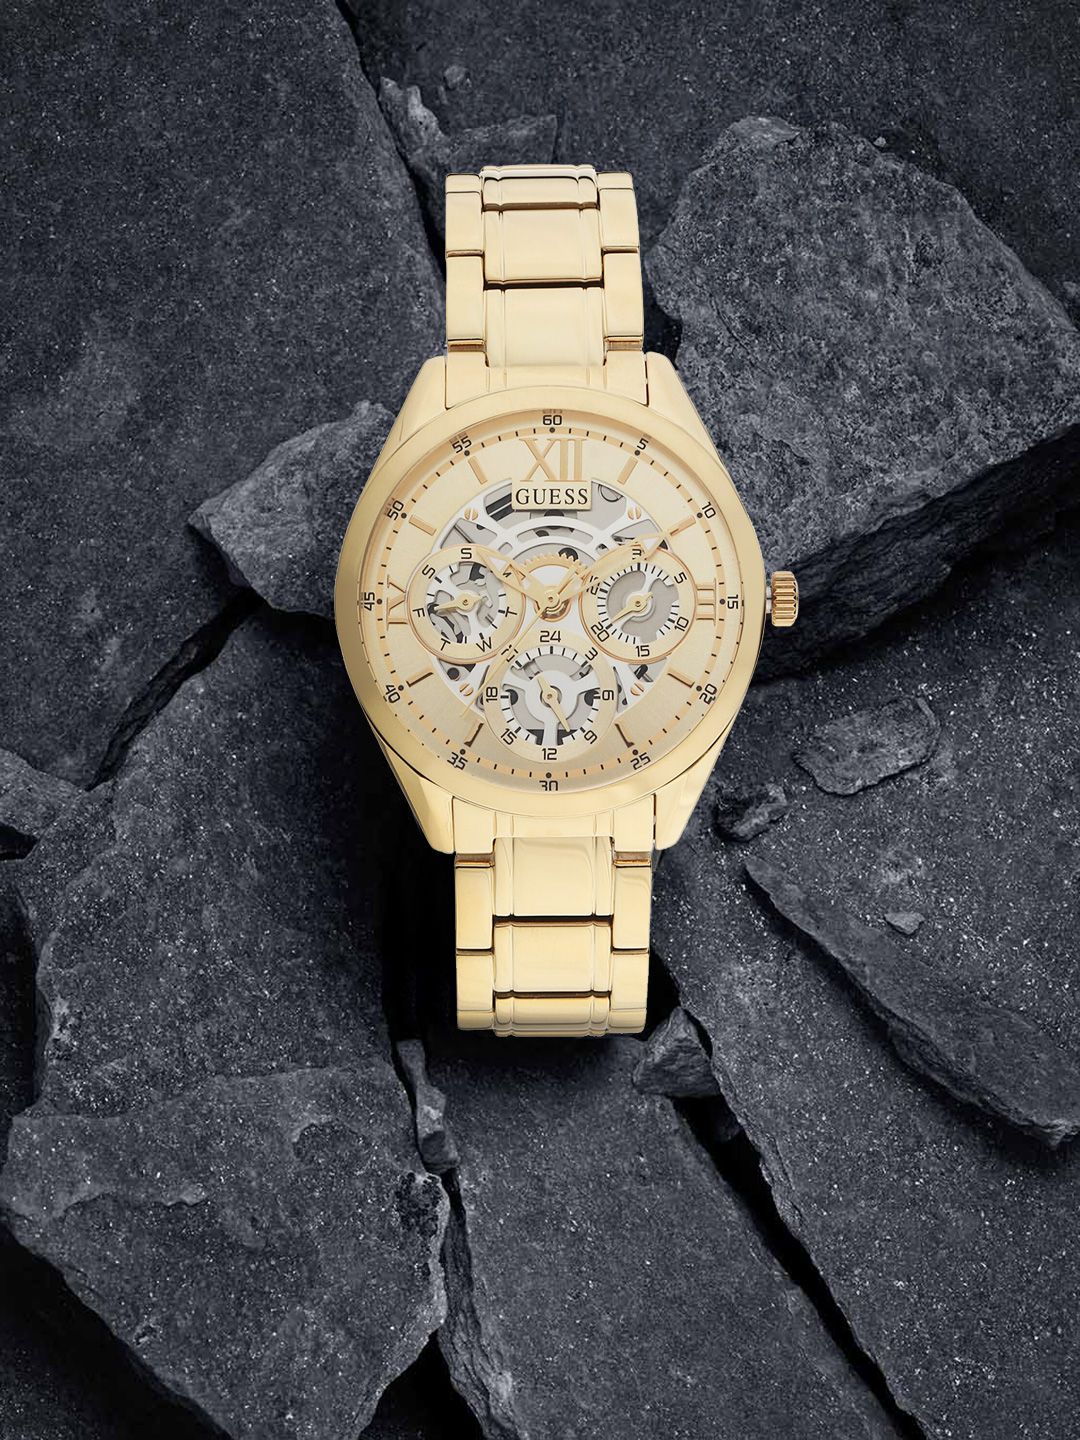 GUESS Women Gold-Toned Skeleton Dial Analogue Watch GW0253L2 Price in India